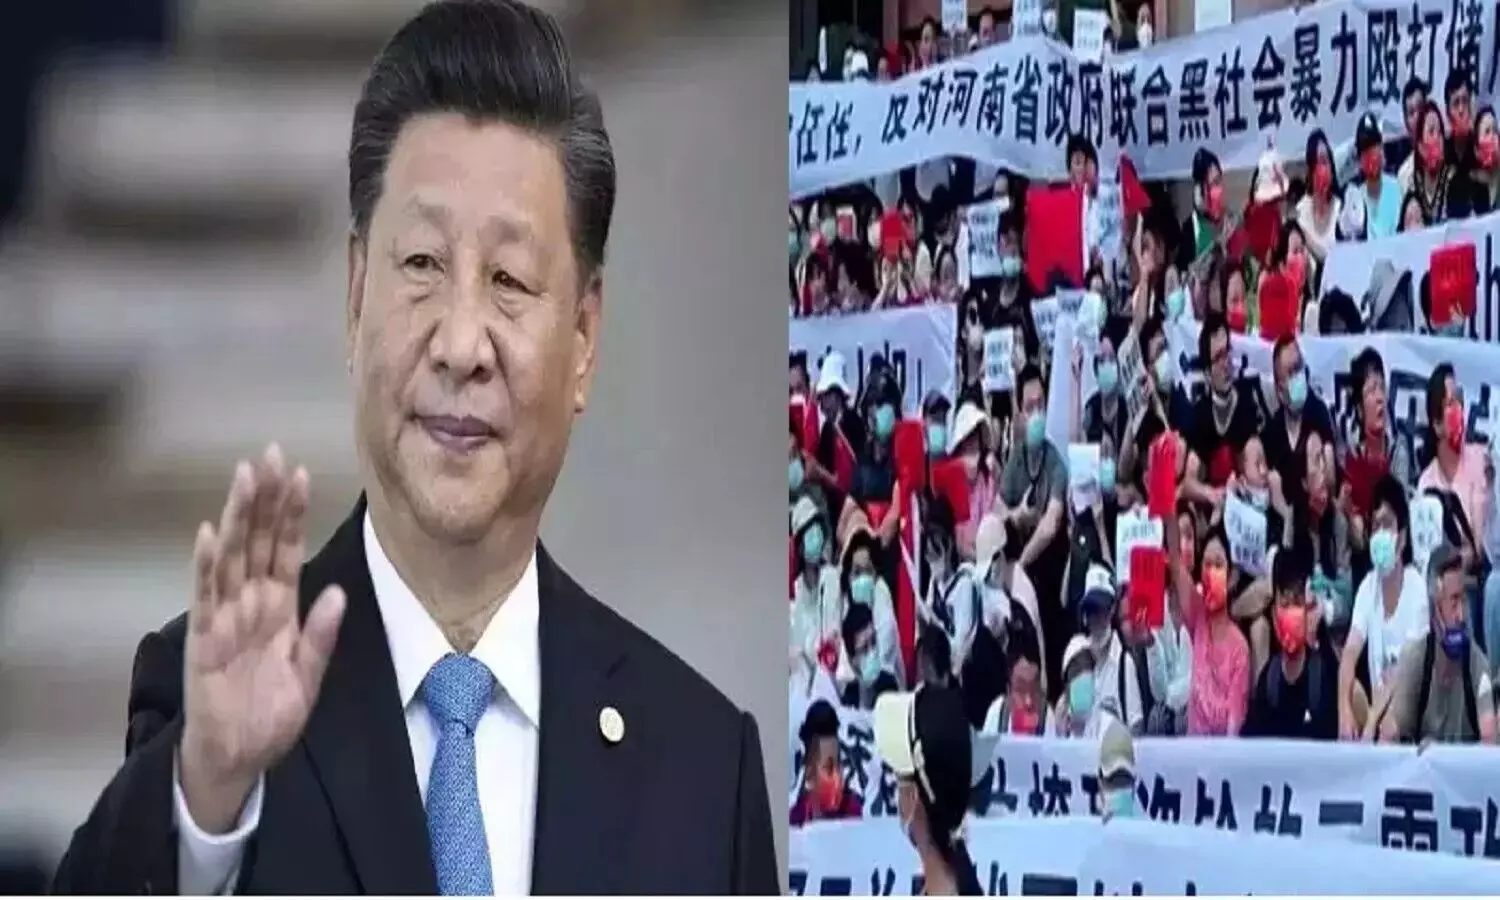 Protest Against Xi Jinping